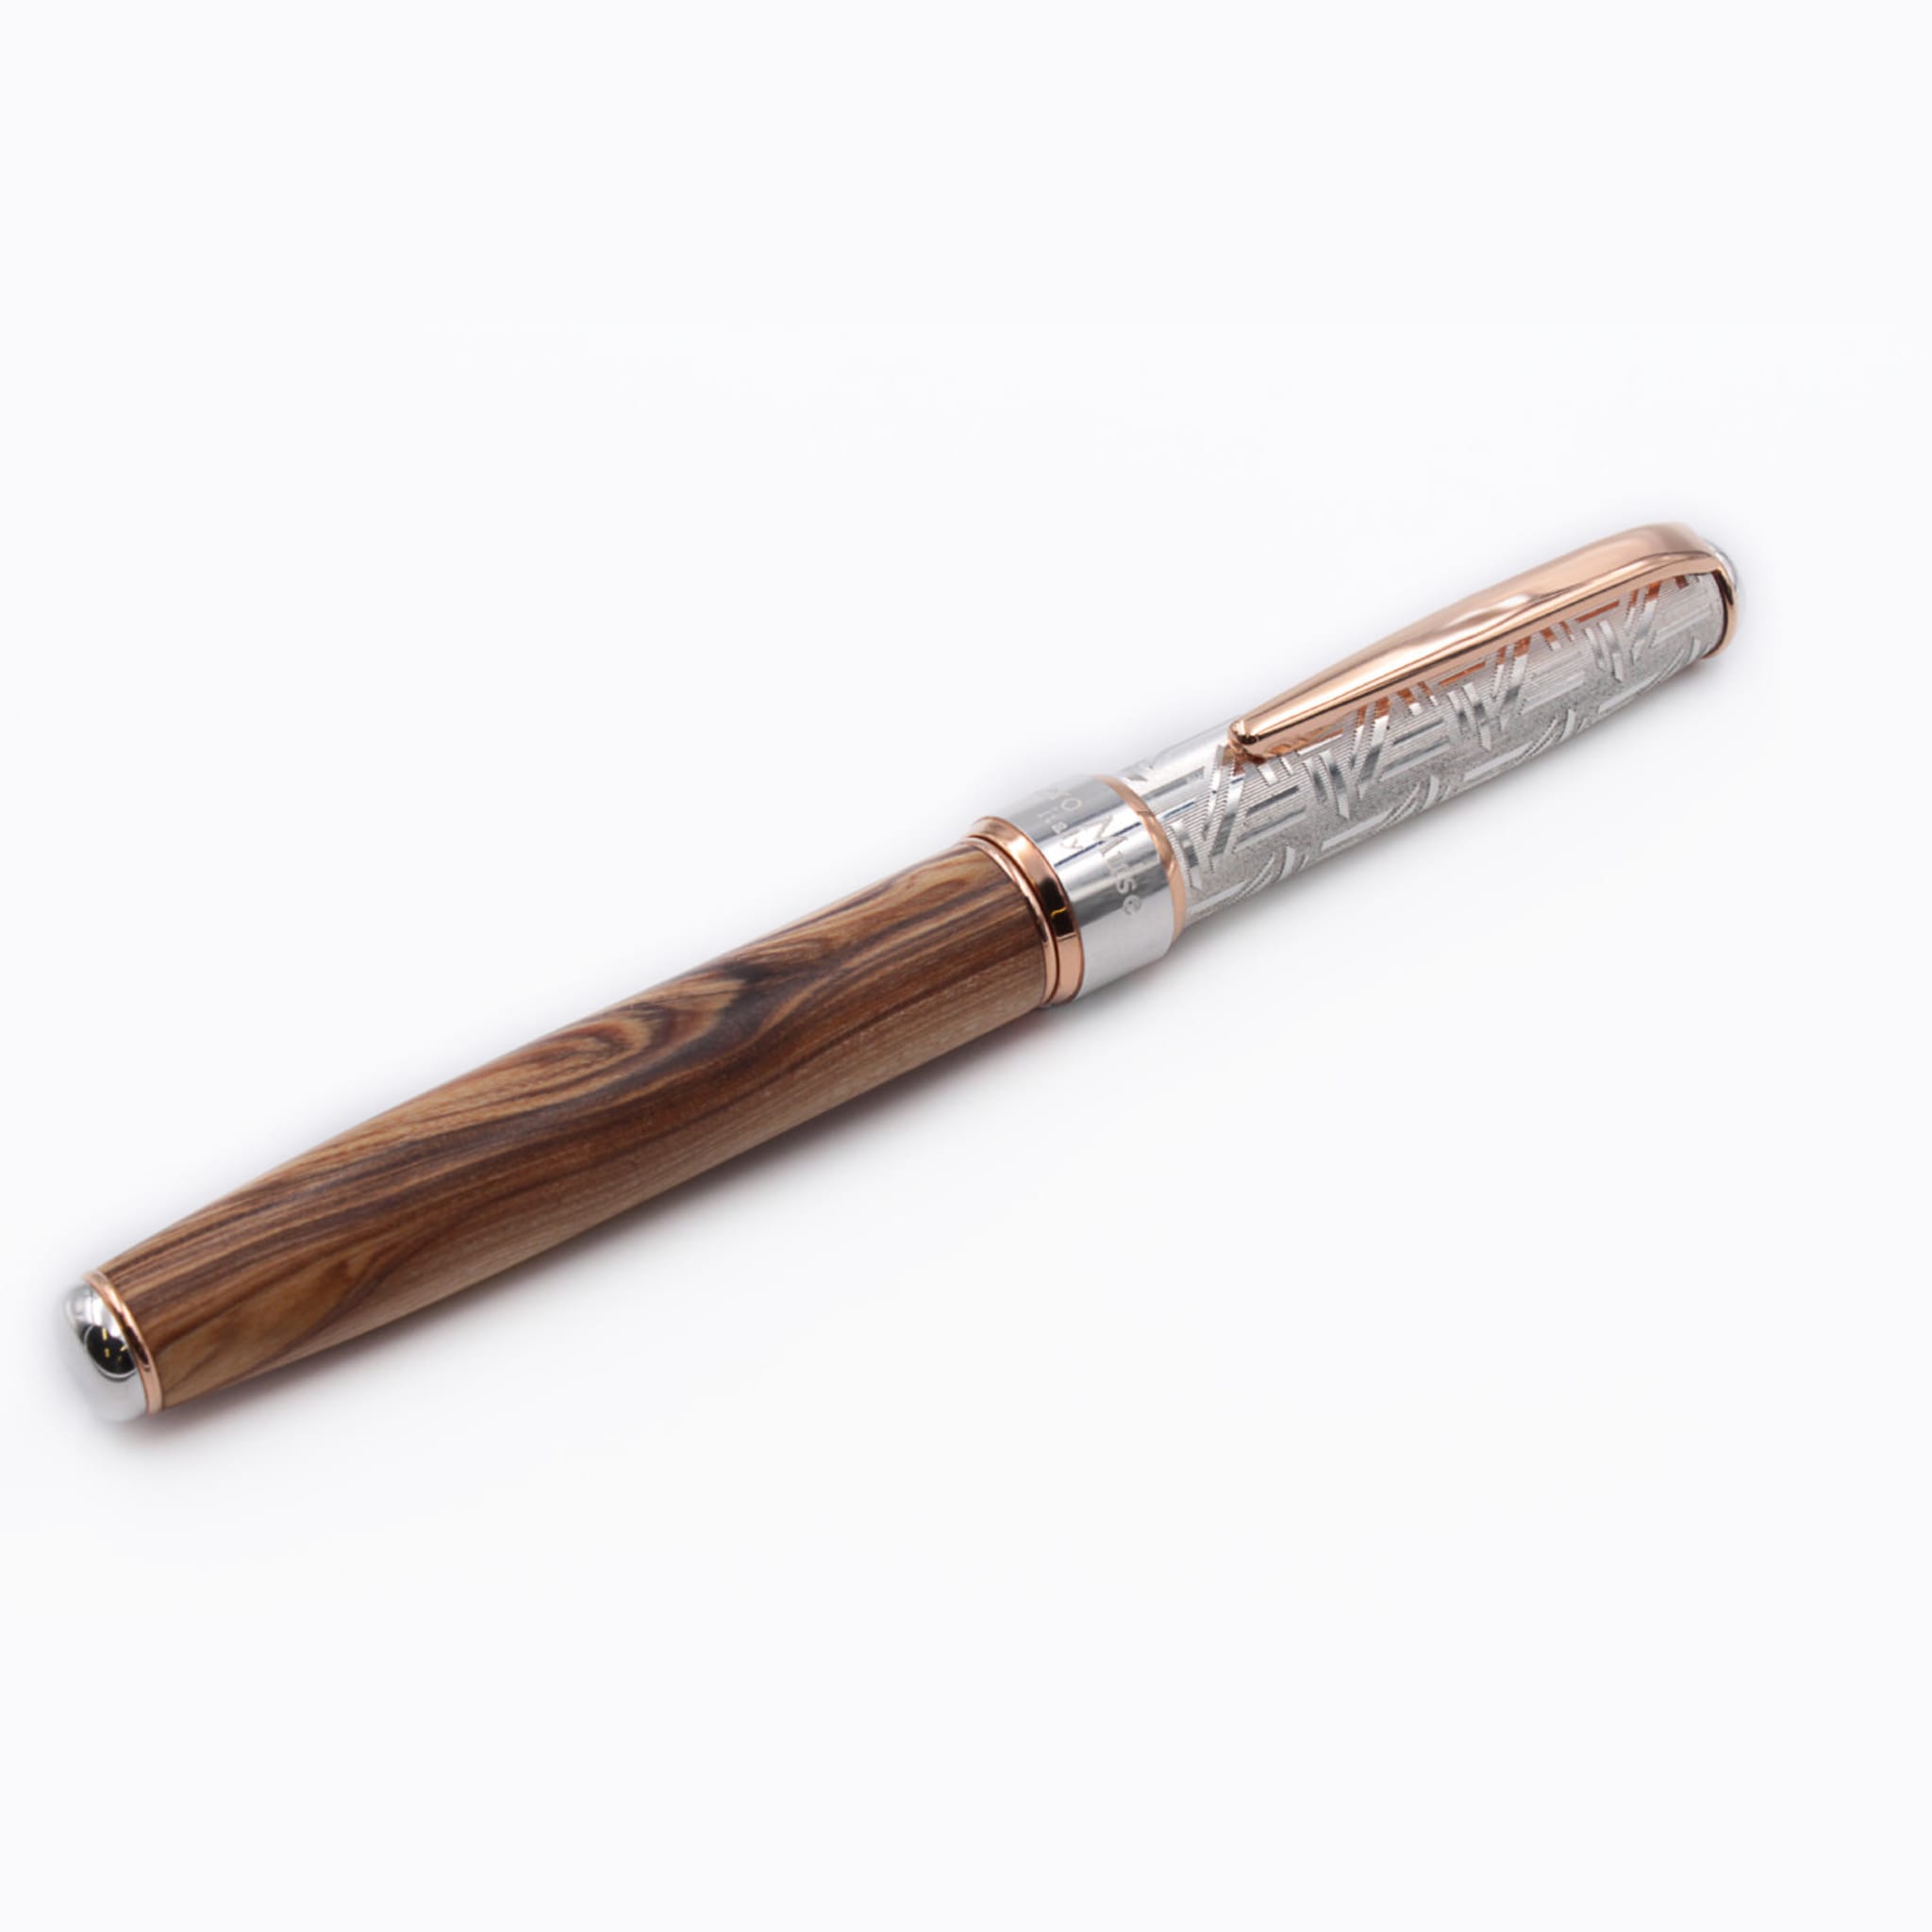 Olive Wood/Silver Fountain Pen - Alternative view 1